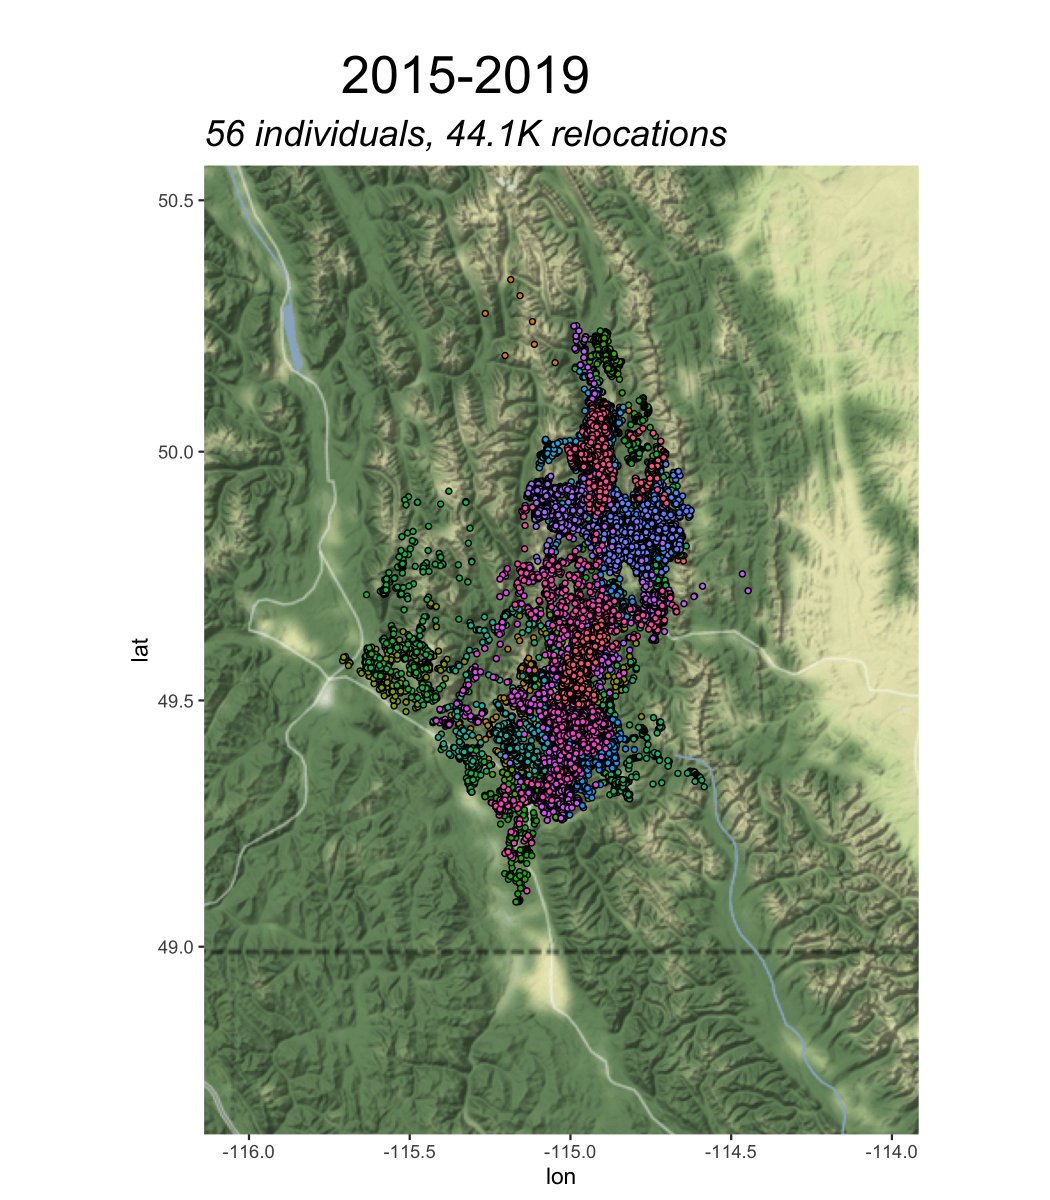 We have followed the lives of 56 grizzly bears in southeast BC. Males, females, young (3-6yo), to old (22+yo). We learn about where the animals live, how they navigate human-dominated landscapes, how many offspring they have, and if/when/how they die.